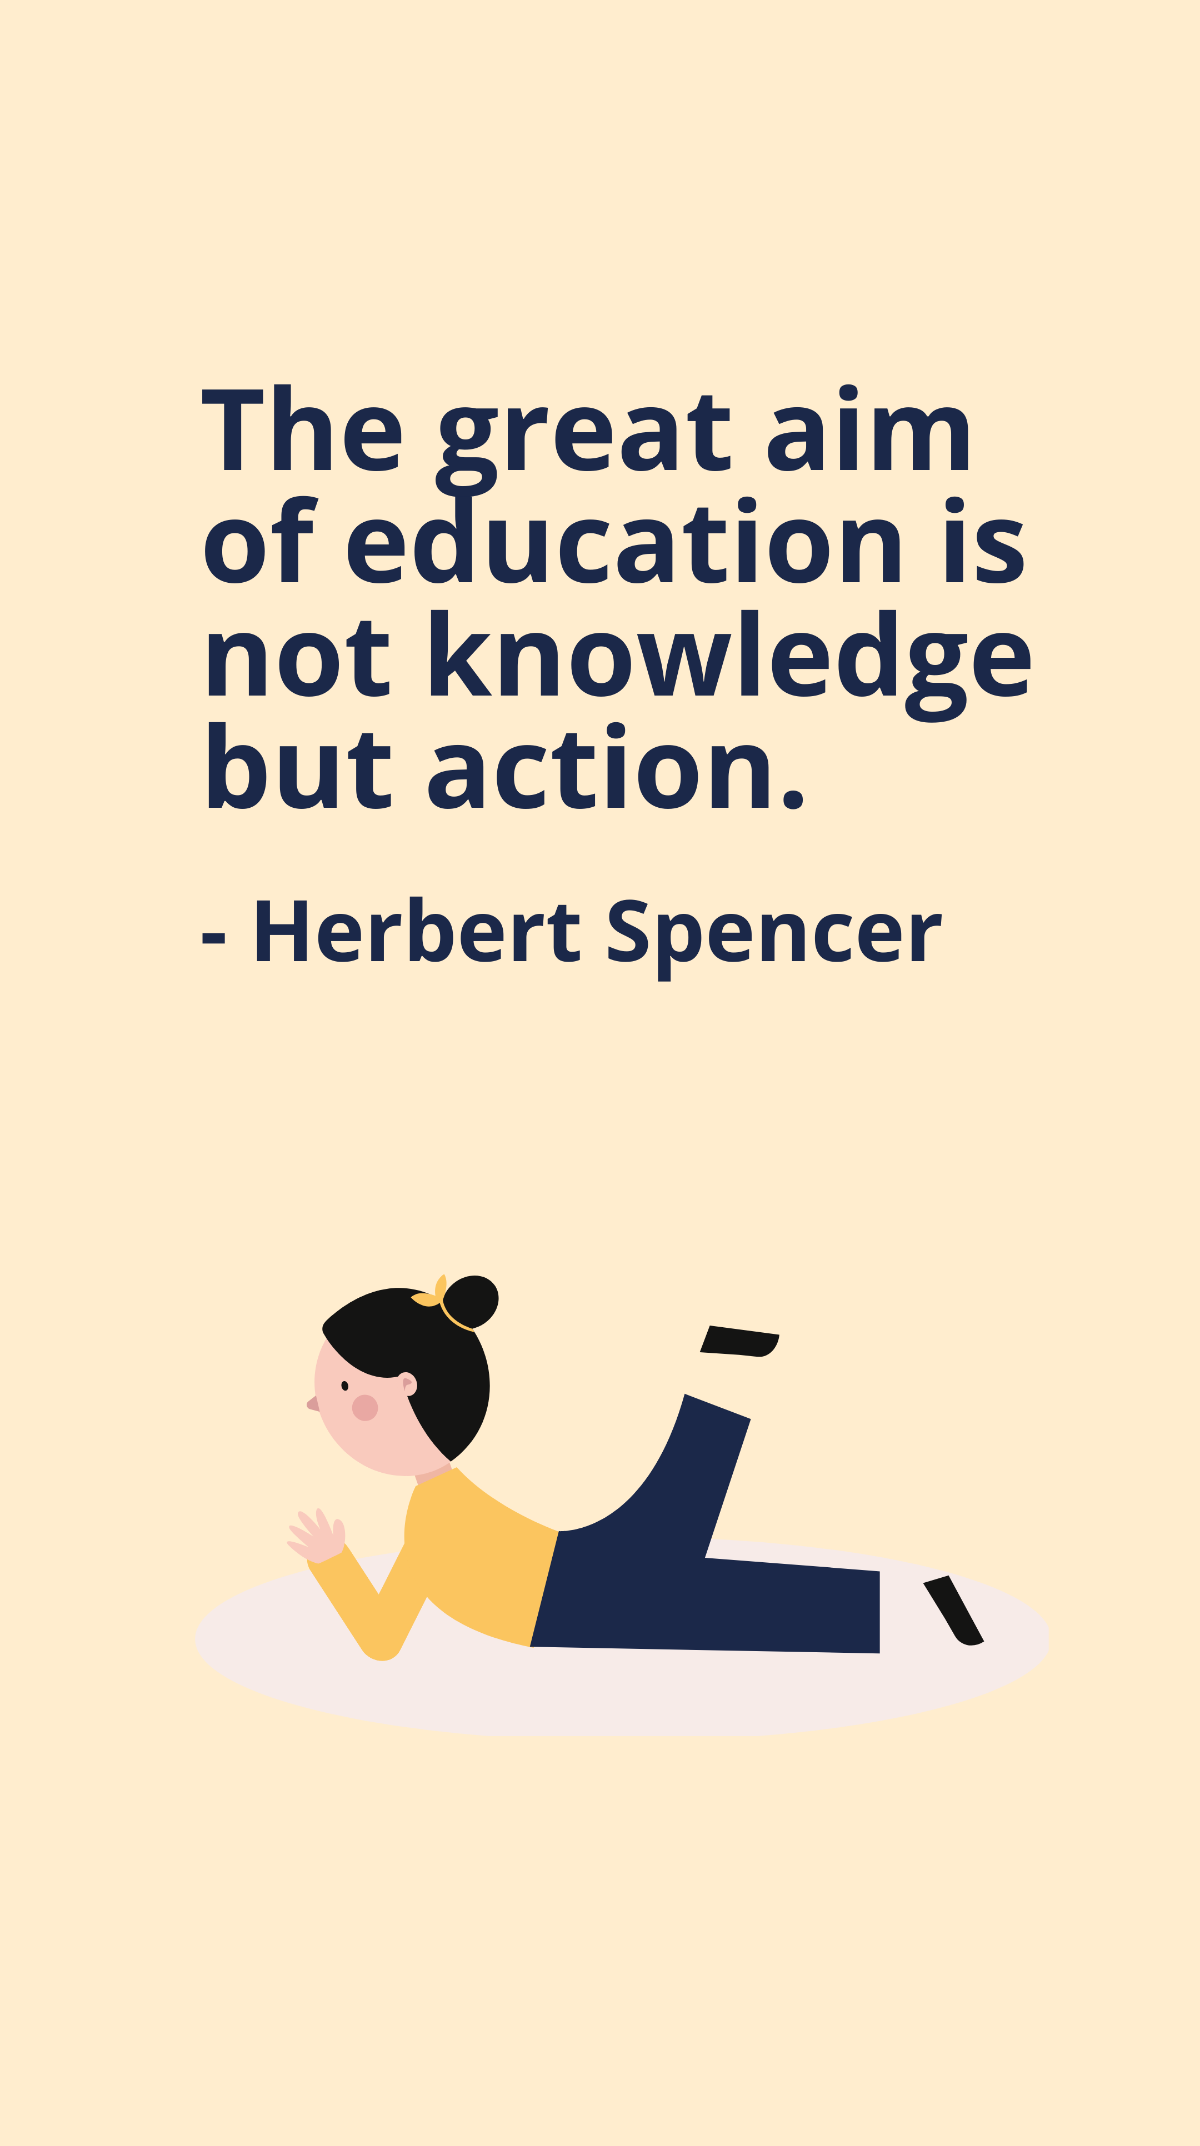 Free Herbert Spencer - The great aim of education is not knowledge but action. Template